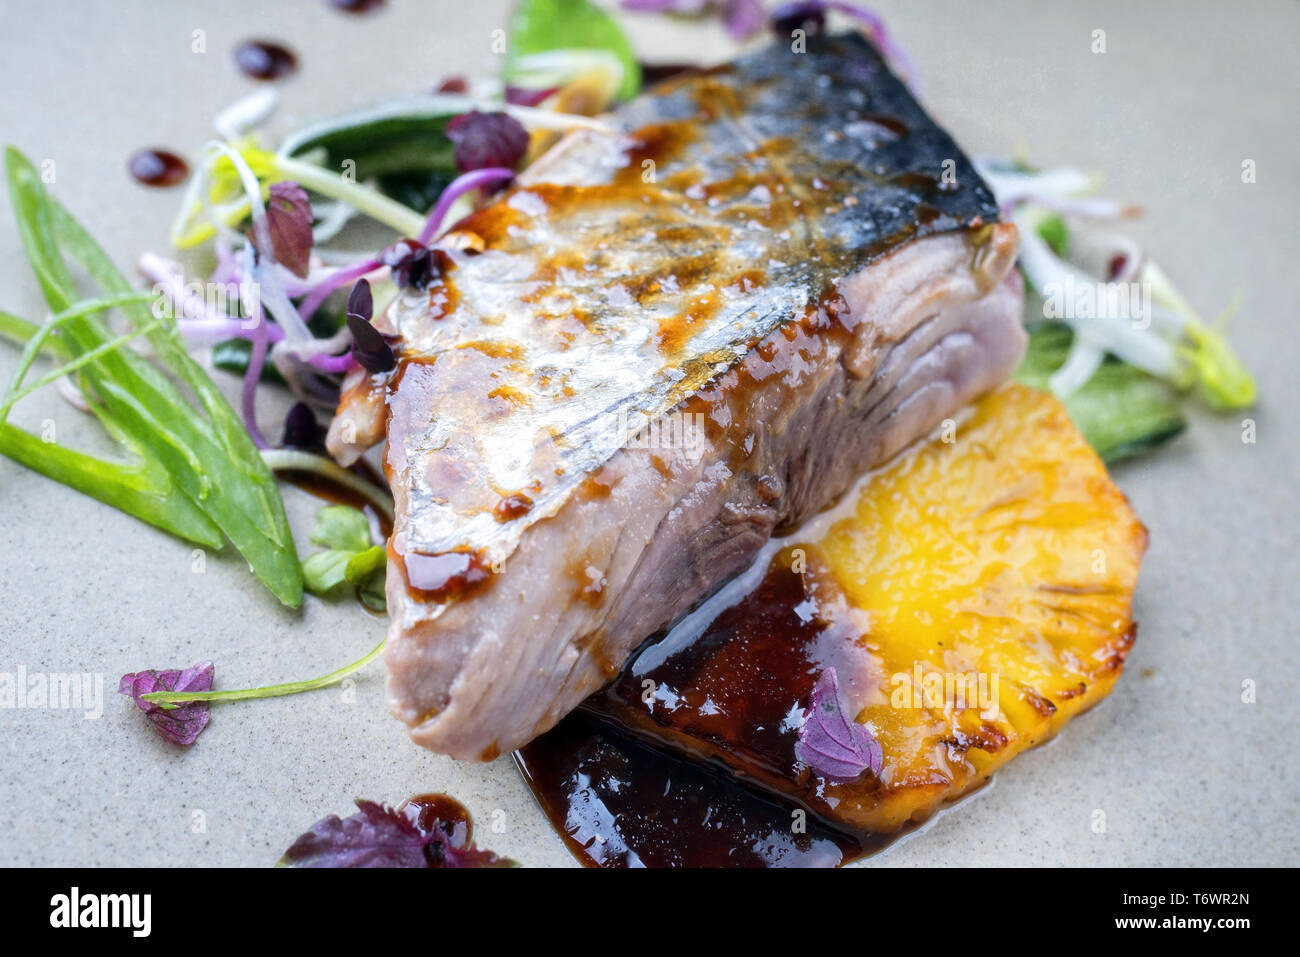 Modern style Japanese bonito tuna fish filet with vegetable and pineapple glazed in teriyaki sauce as closeup on a plate Stock Photo